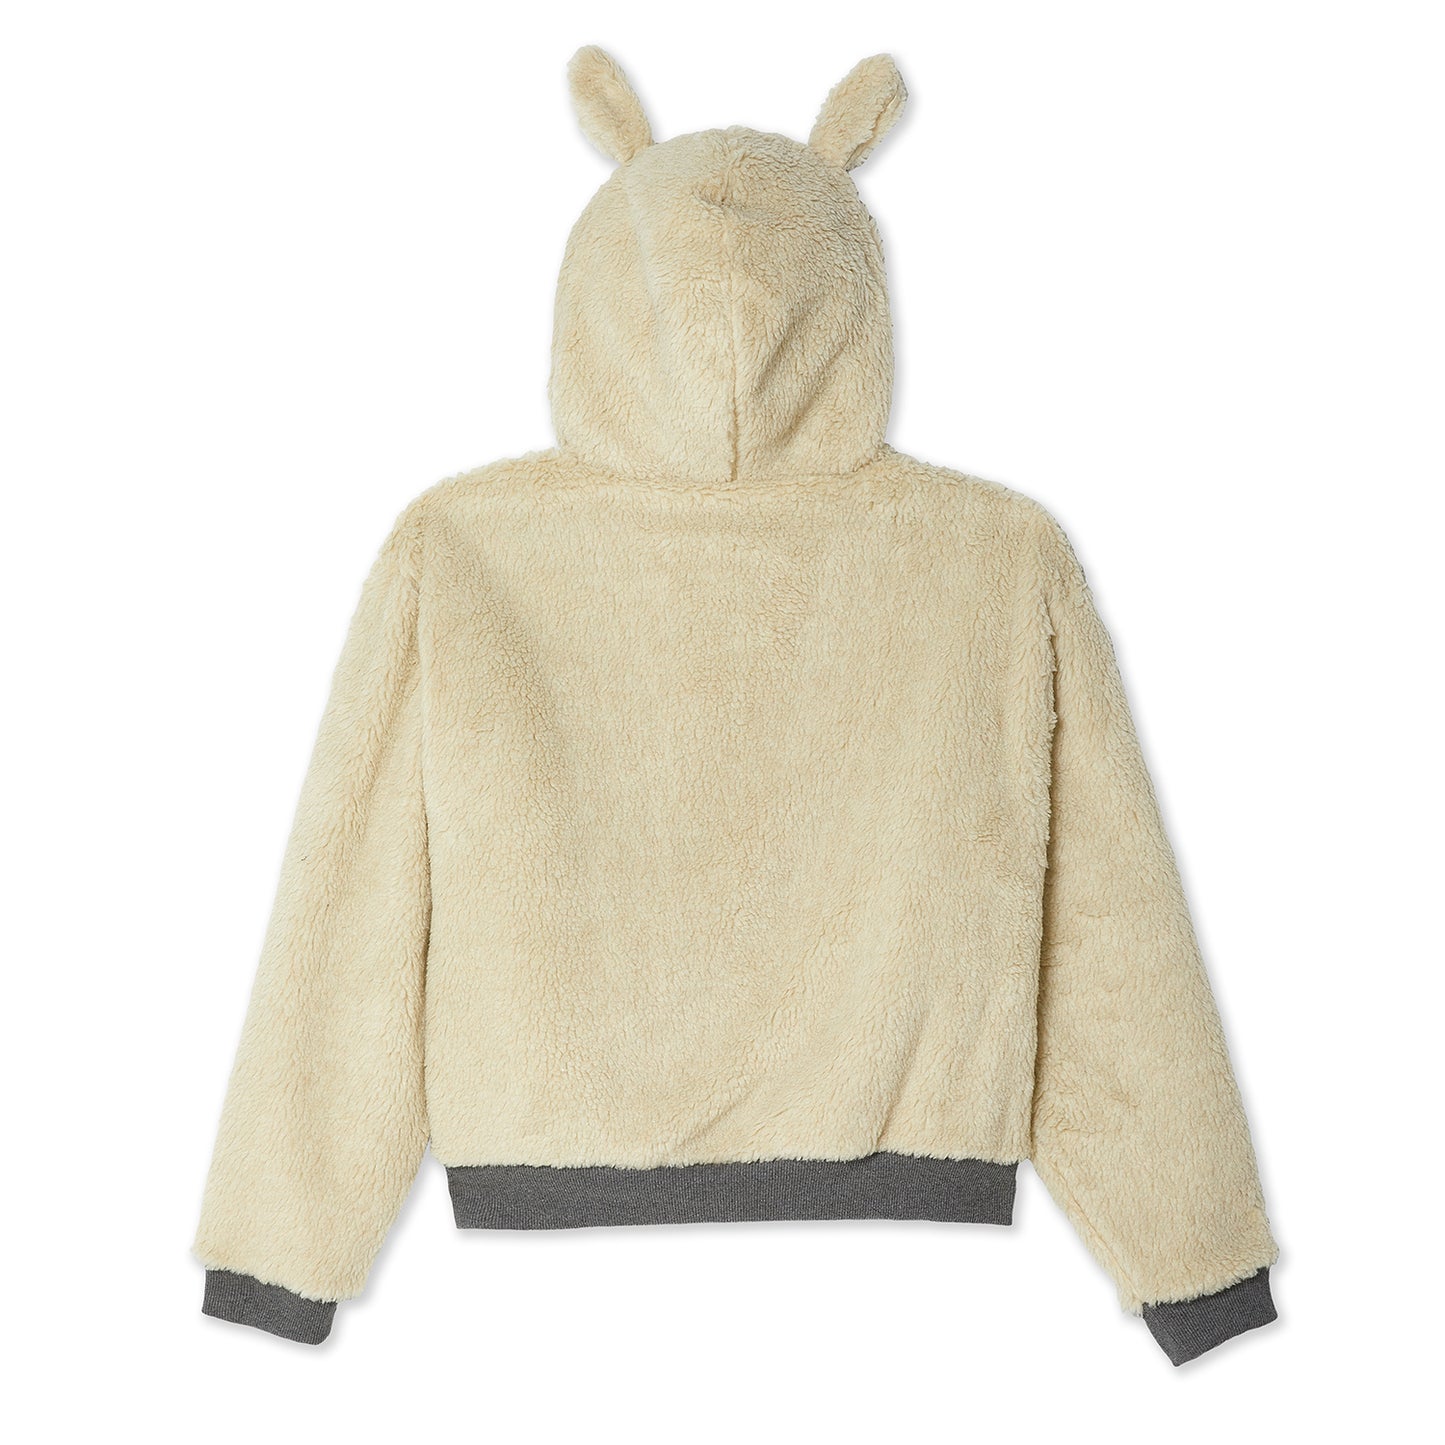 REVERSIBLE WOLF AND SHEEP HOODIE KNIT